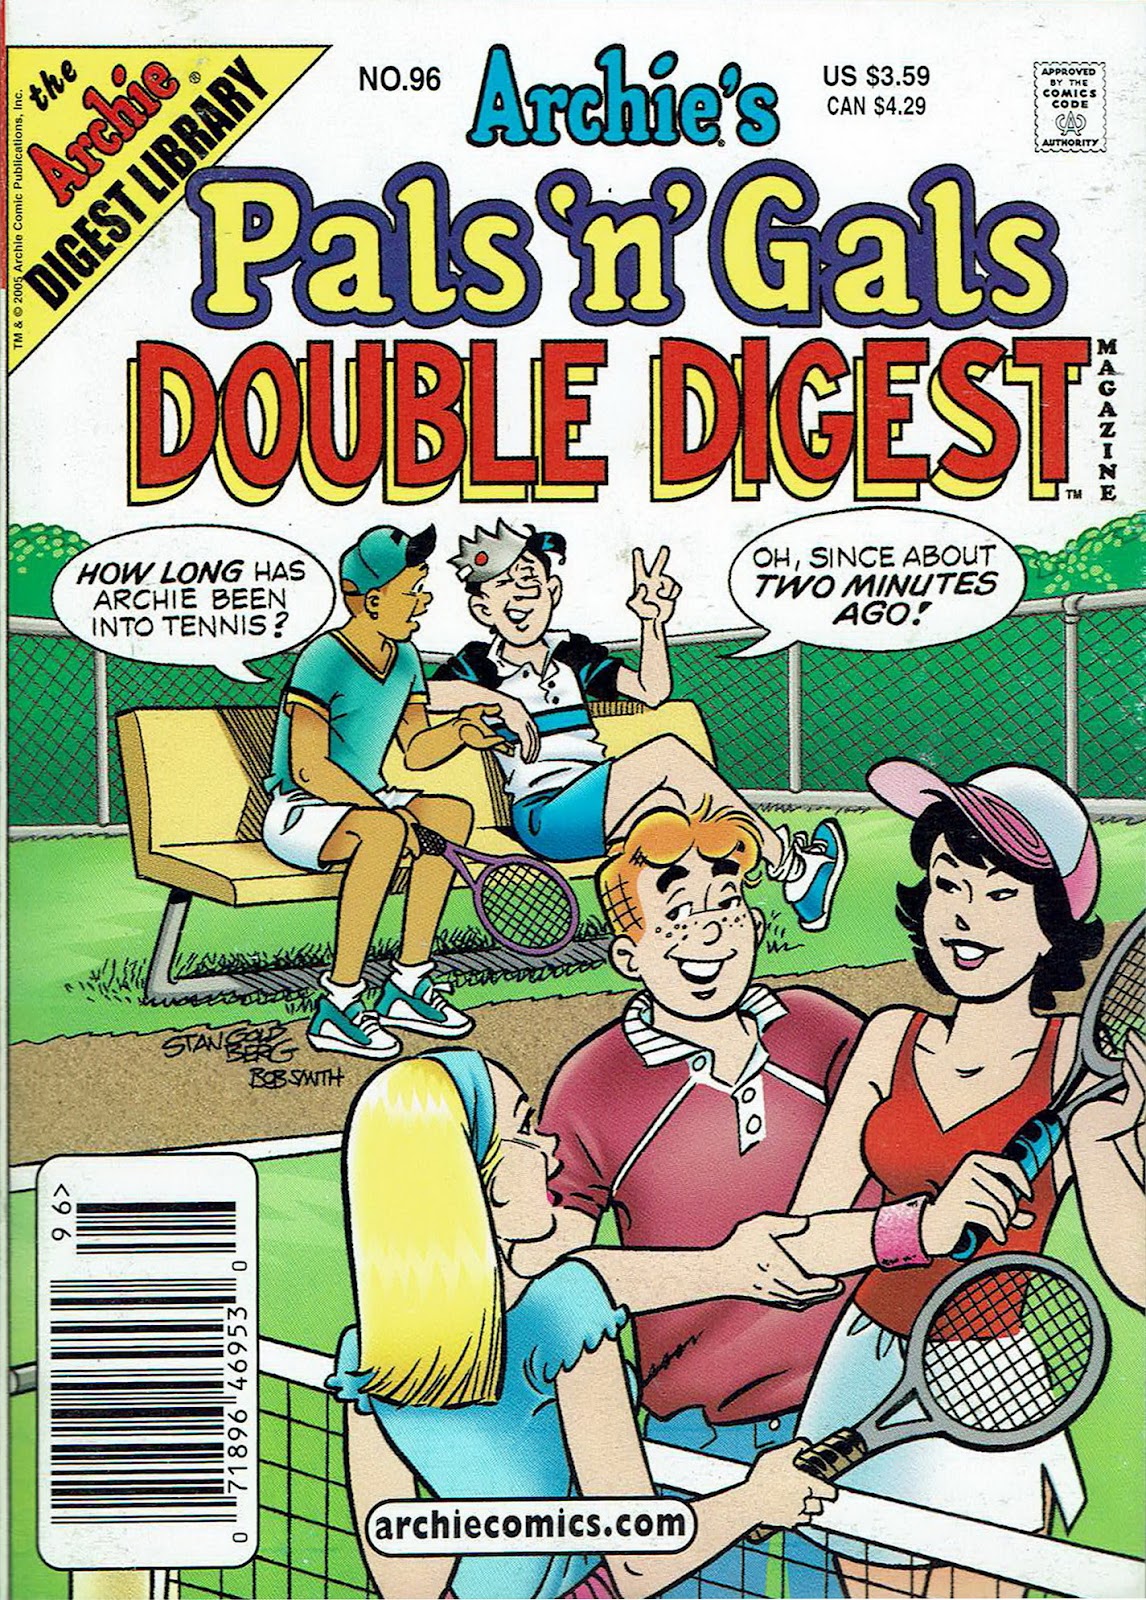 Archie's Pals 'n' Gals Double Digest Magazine issue 96 - Page 1